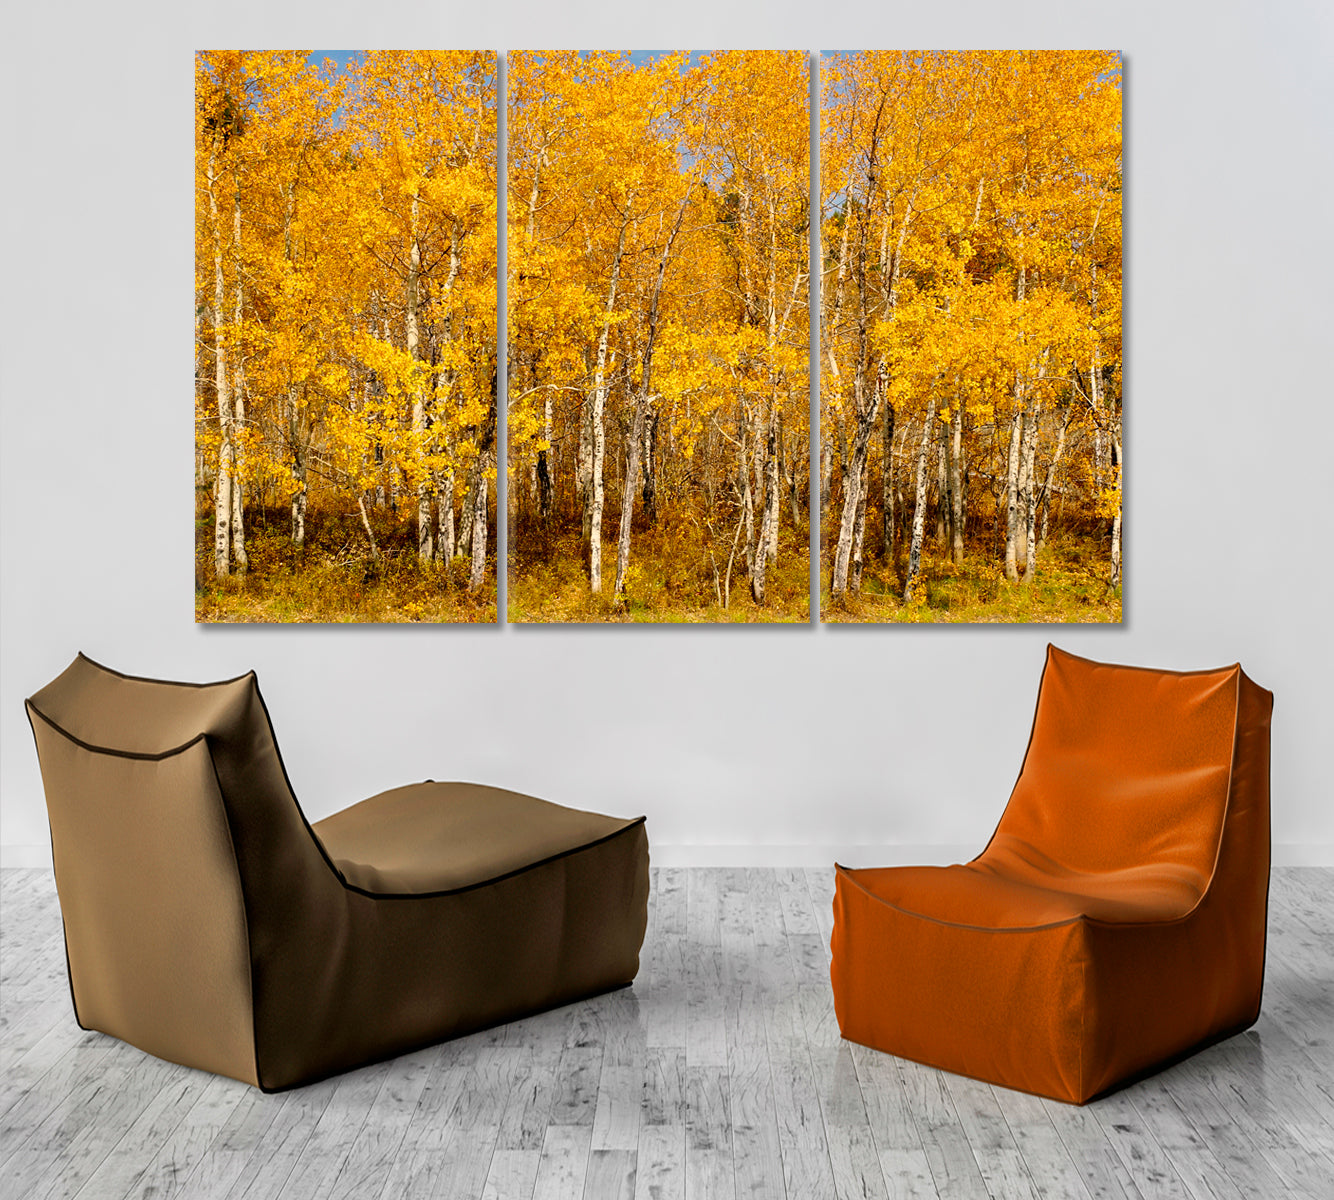 BEAUTIFUL AUTUMN Colorful Stands Of Aspen Trees Nature Wall Canvas Print Artesty 3 panels 36" x 24" 